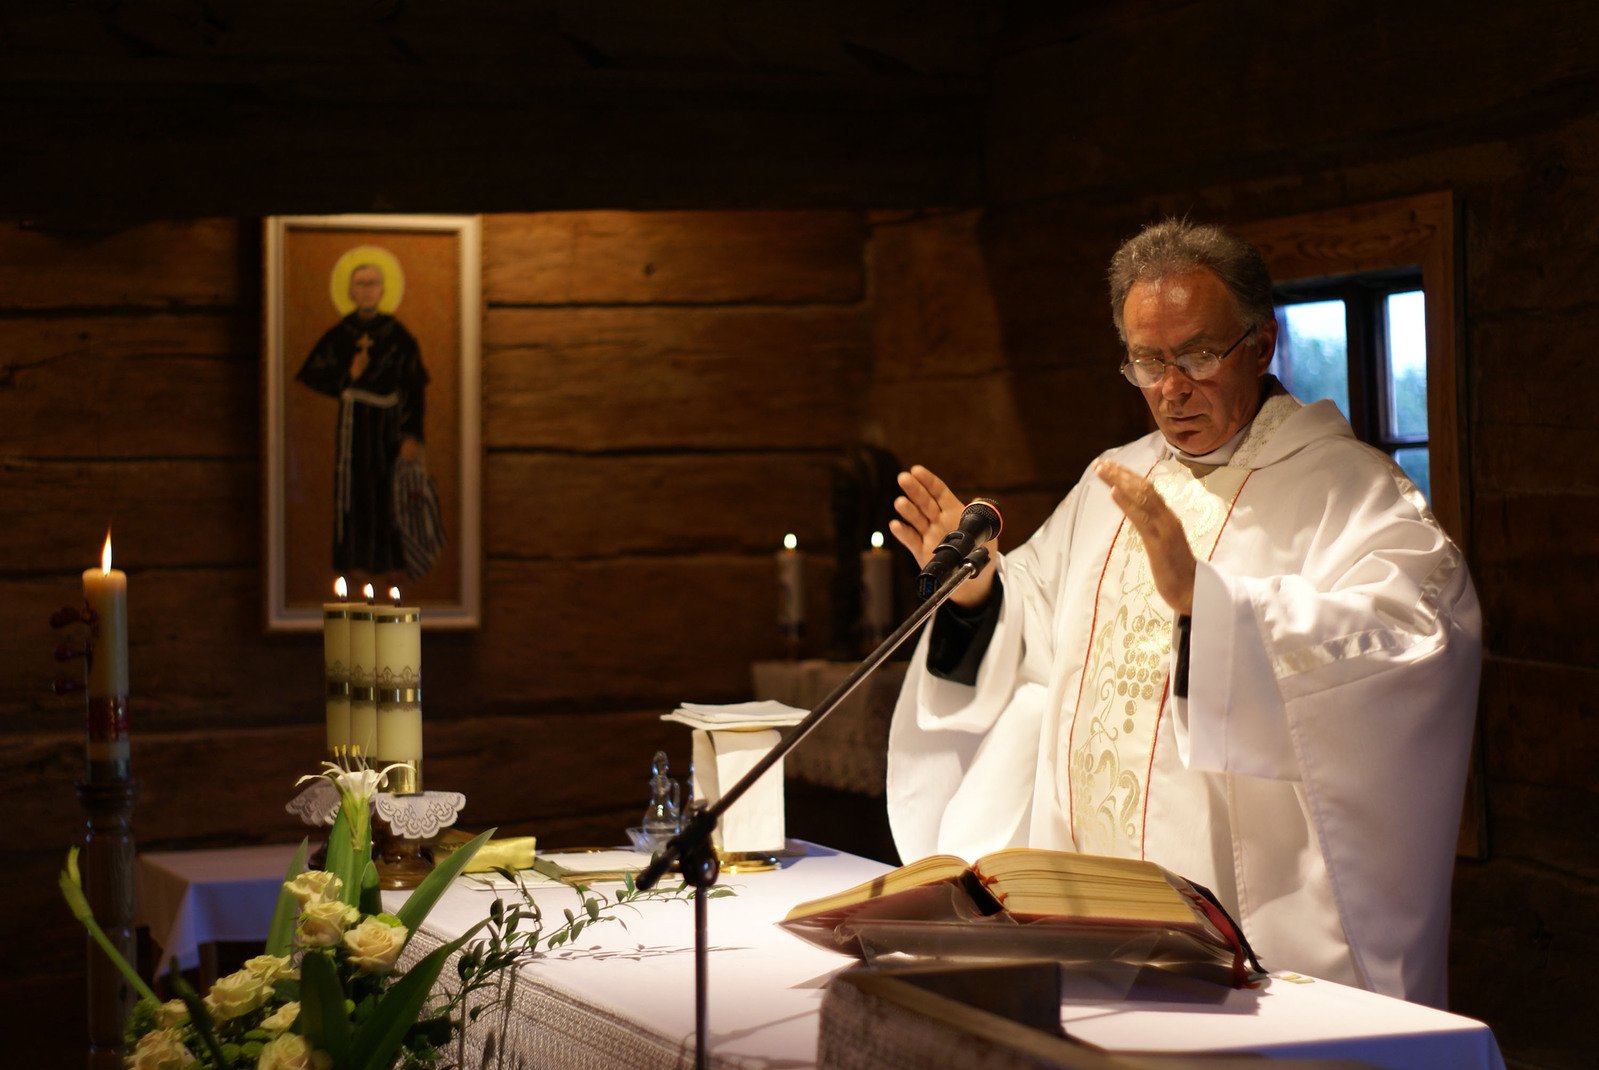 the priest is standing at the alter with his hands in prayer